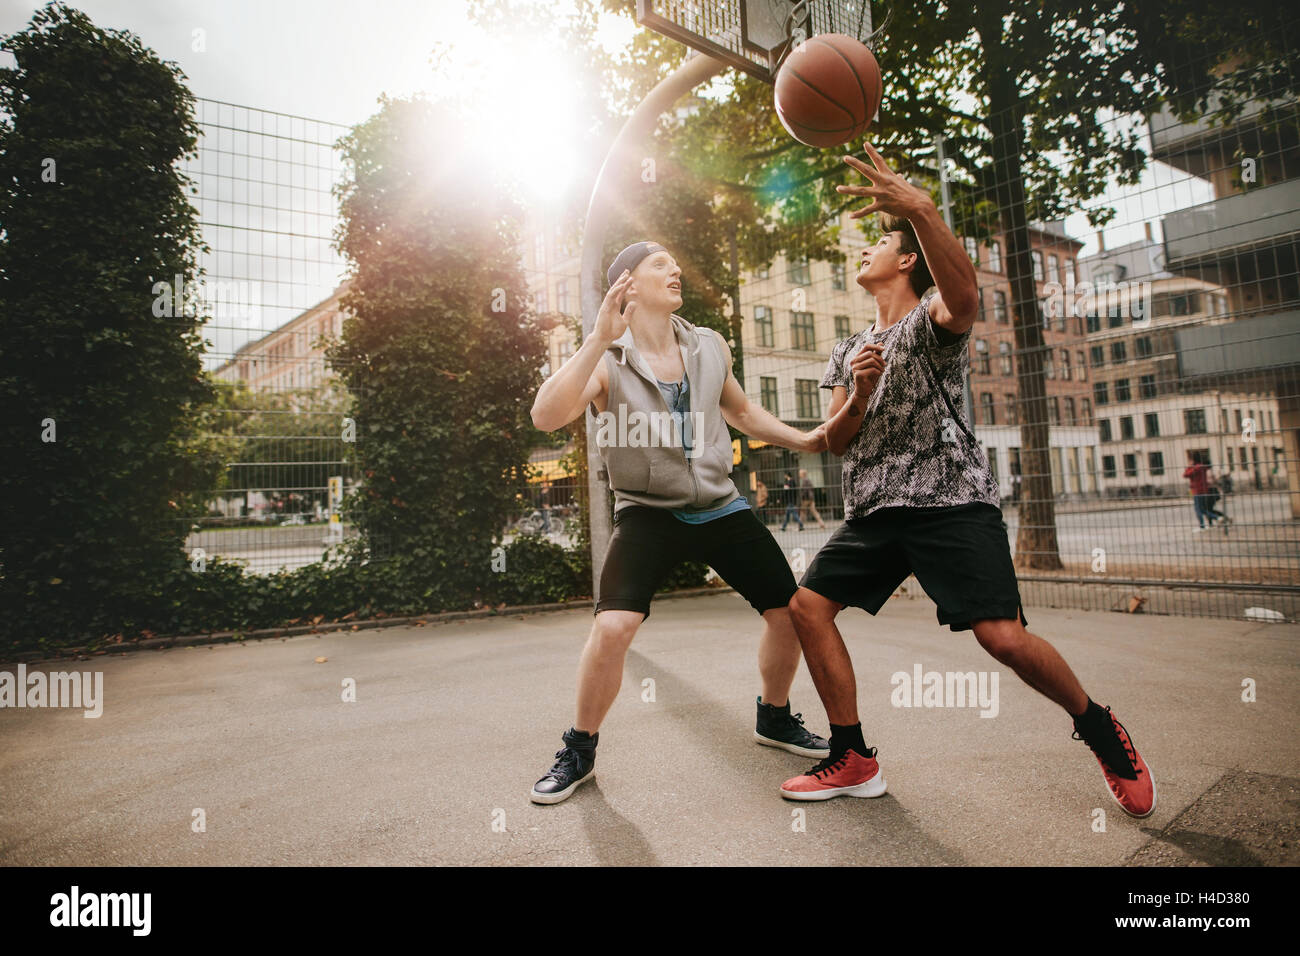 Teenage friends playing basketball against each other on an outdoor court. Two young men playing a game of basketball. Stock Photo